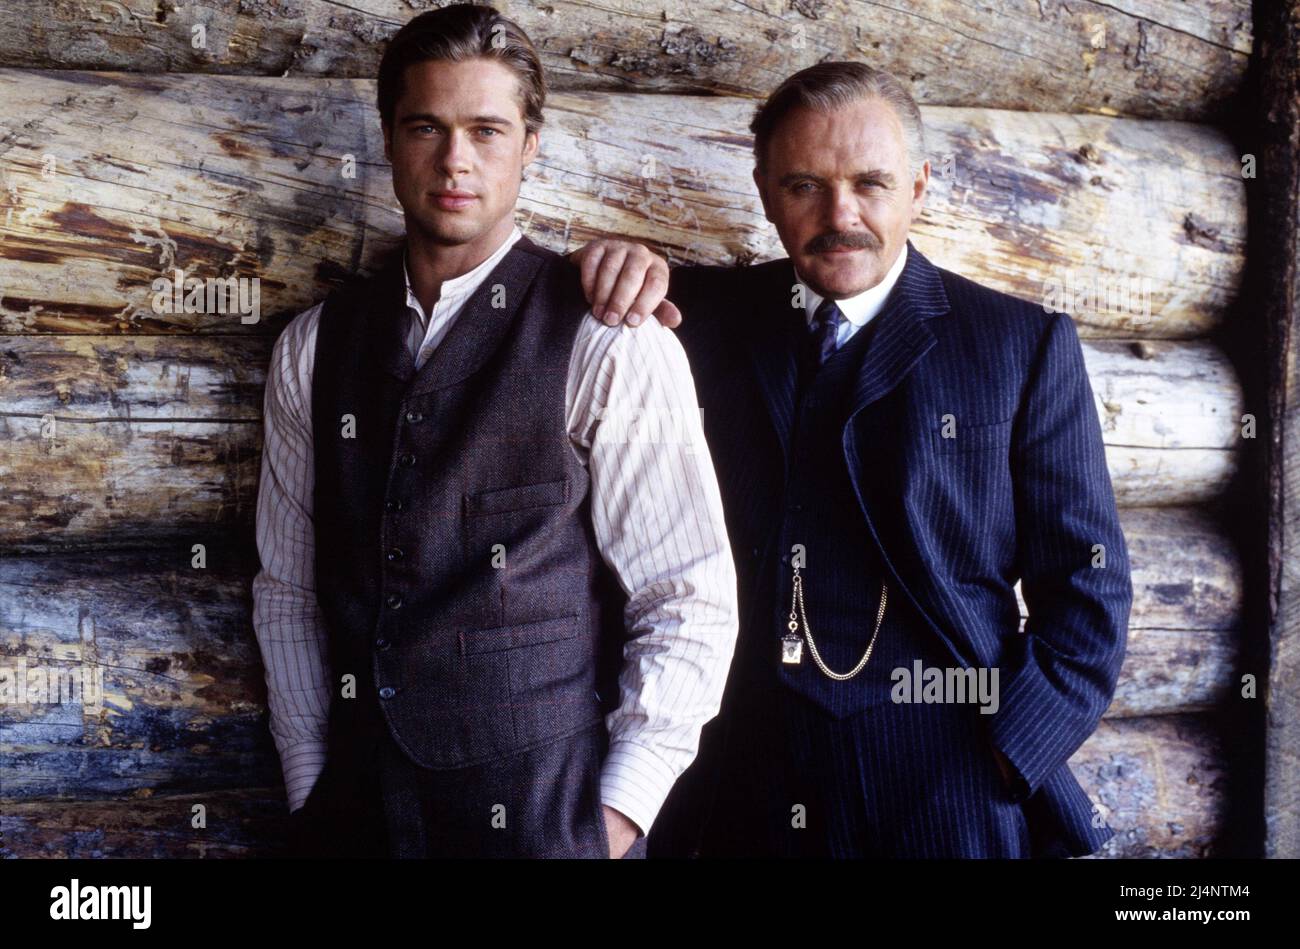 ANTHONY HOPKINS and BRAD PITT in LEGENDS OF THE FALL (1994), directed by EDWARD ZWICK. Credit: TRISTAR PICTURES / Album Stock Photo